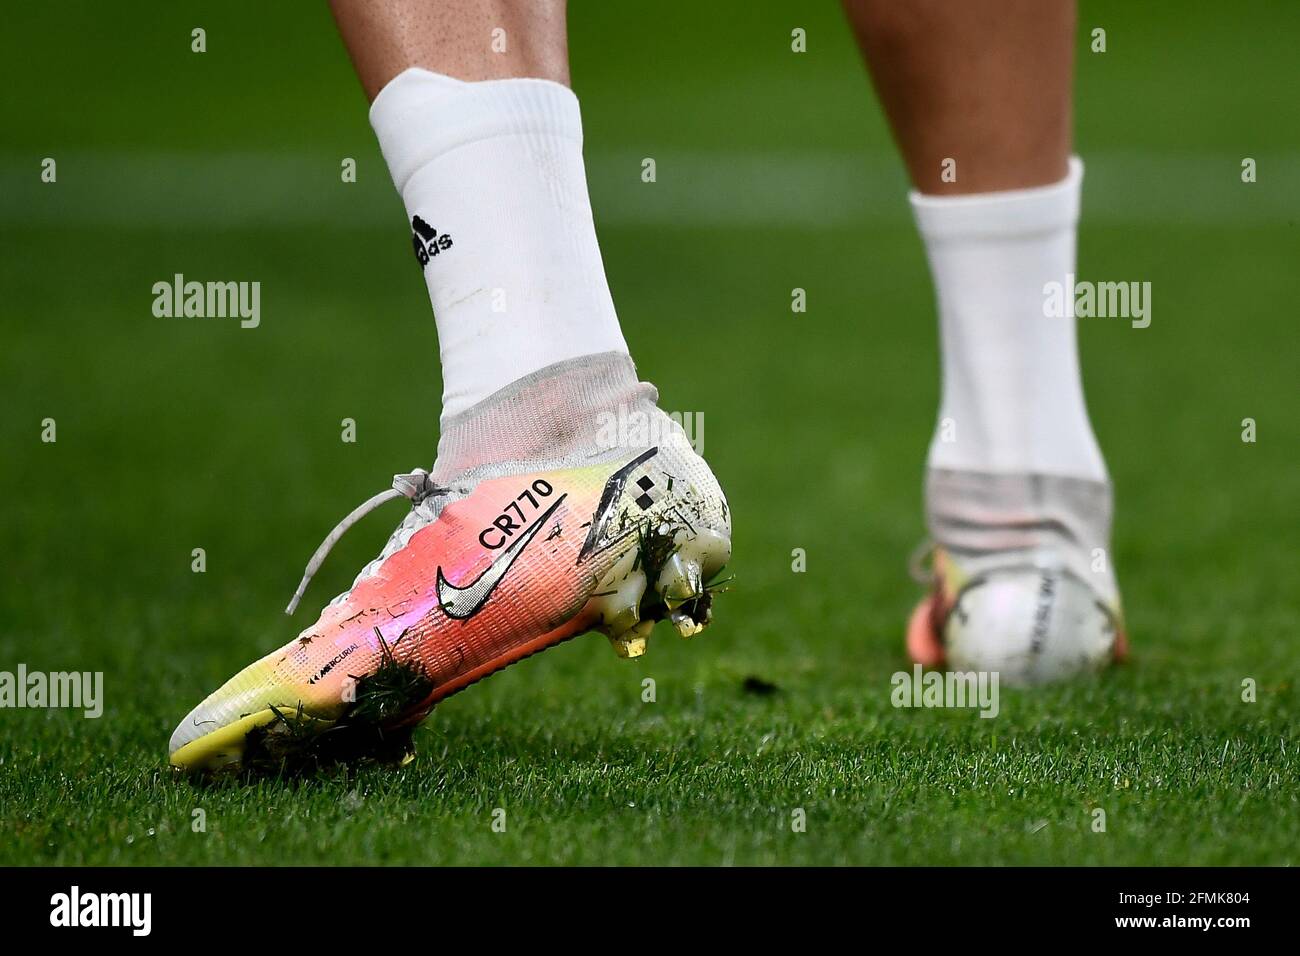 Nike Football Boots High Resolution Stock Photography and Images - Alamy